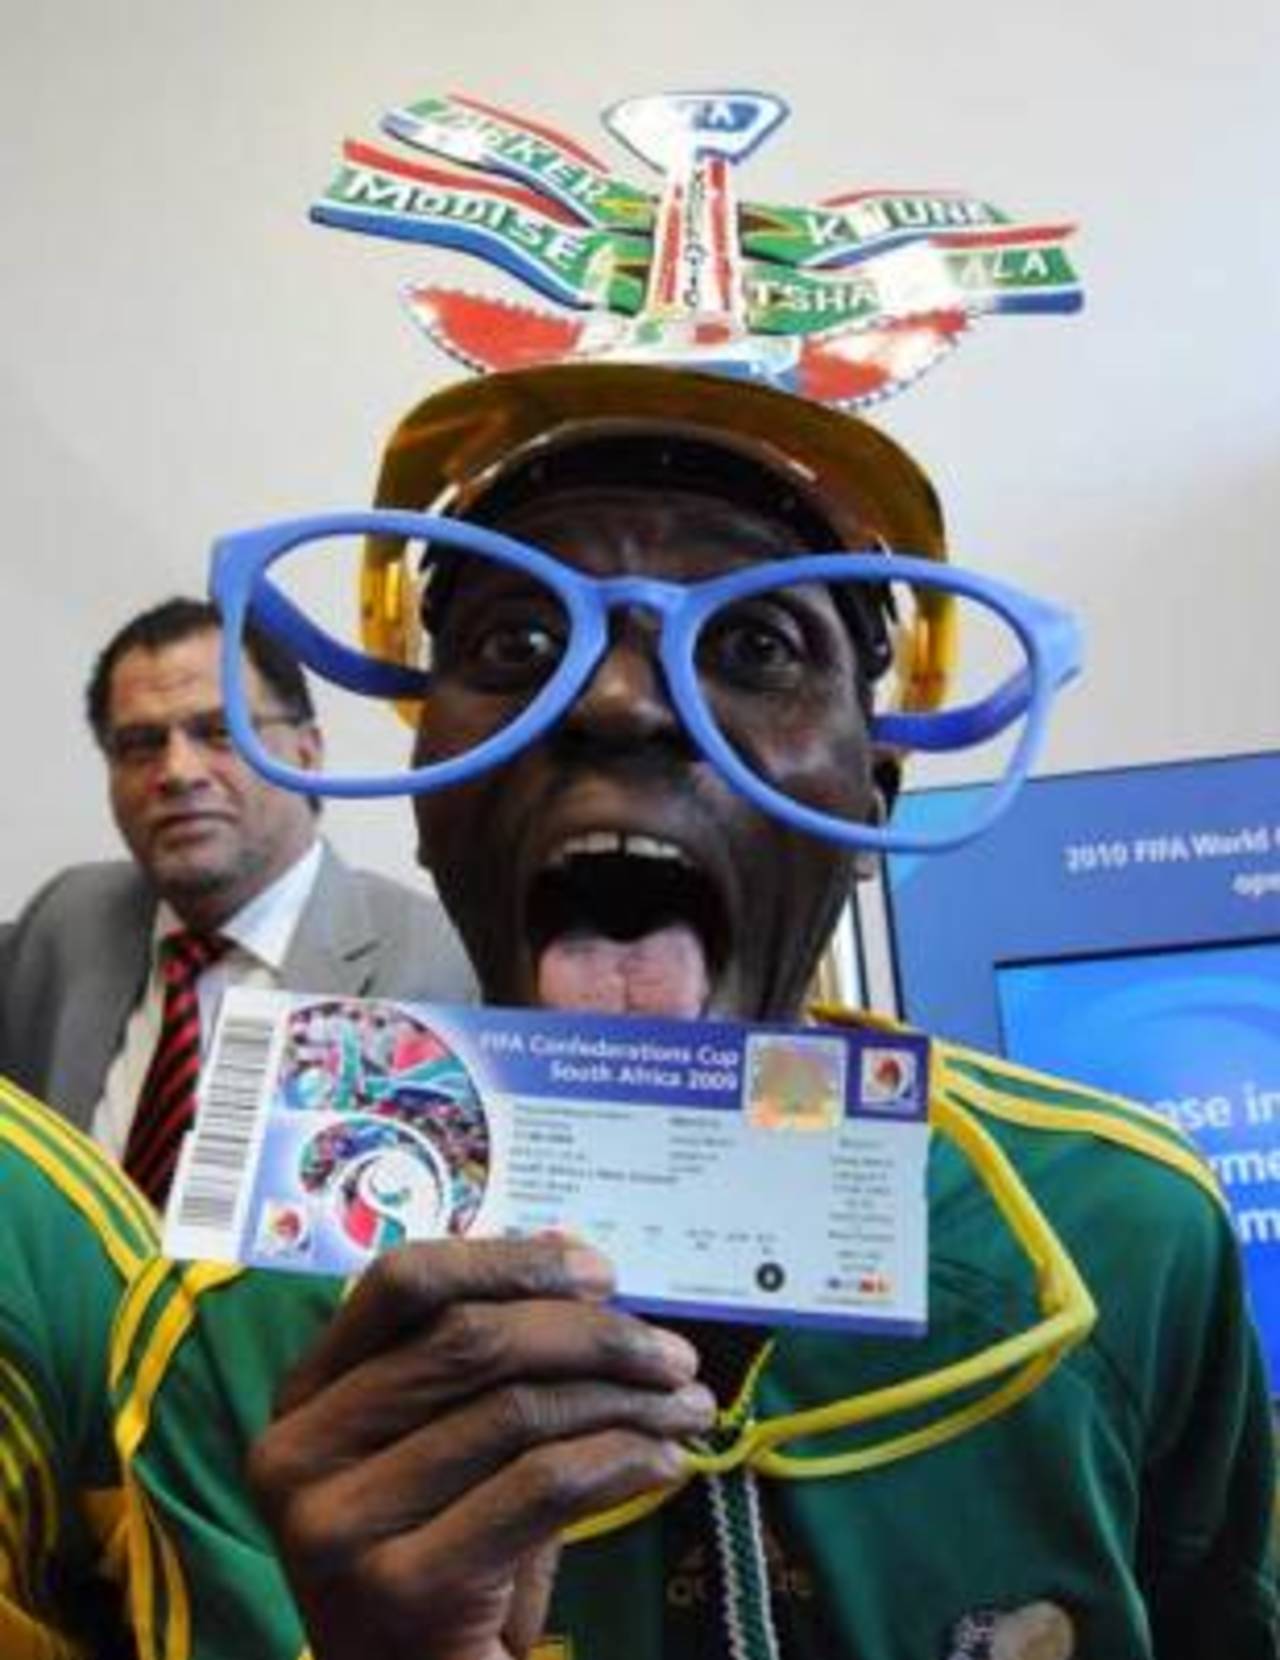 A football fan celebrates getting one of the first tickets for the Confederations Cup, Johannesburg, April 29, 2009